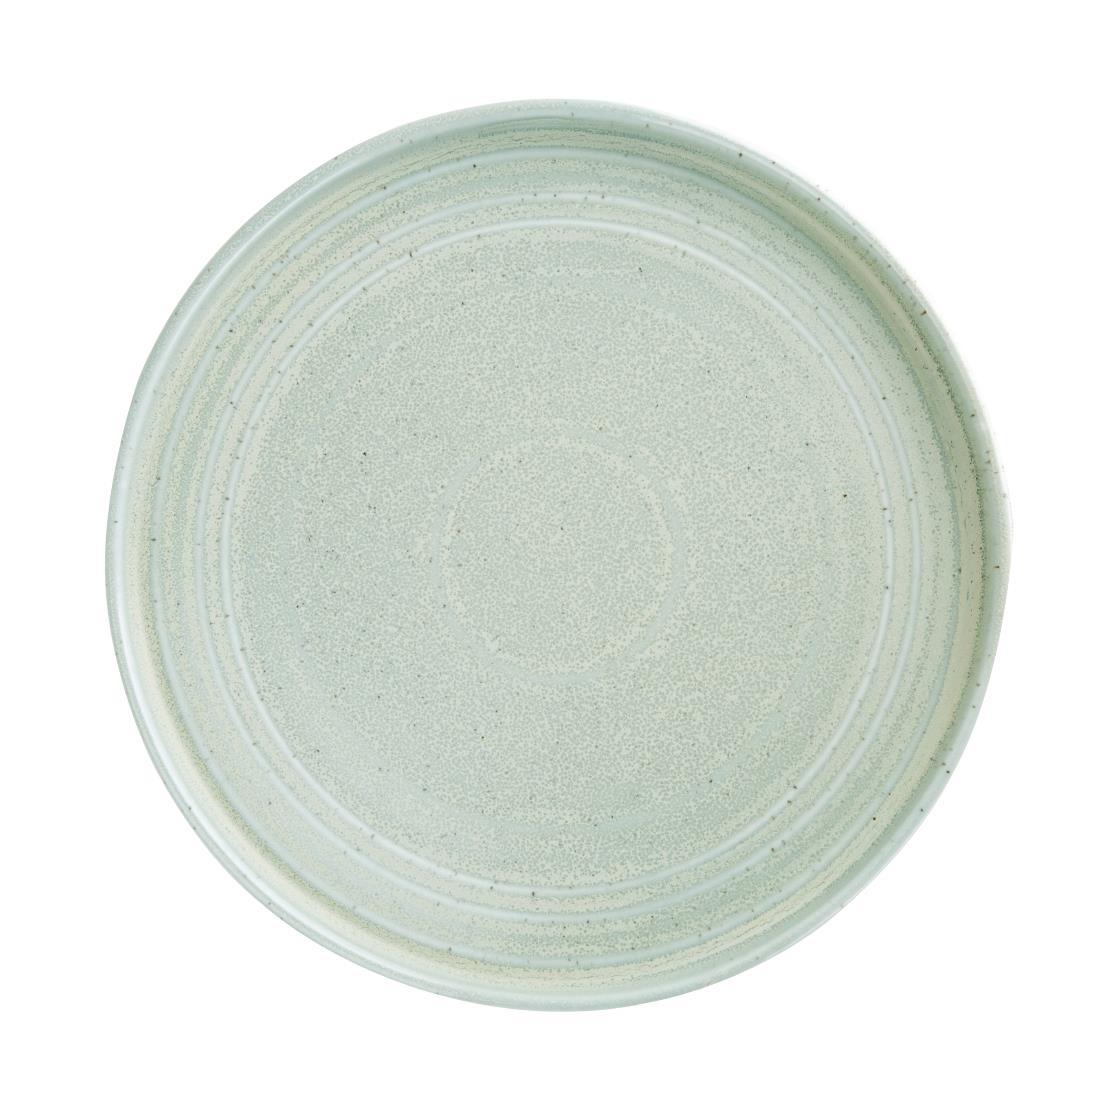 Olympia Cavolo Flat Round Plates Spring Green 270mm (Pack of 4) - FB564  - 1